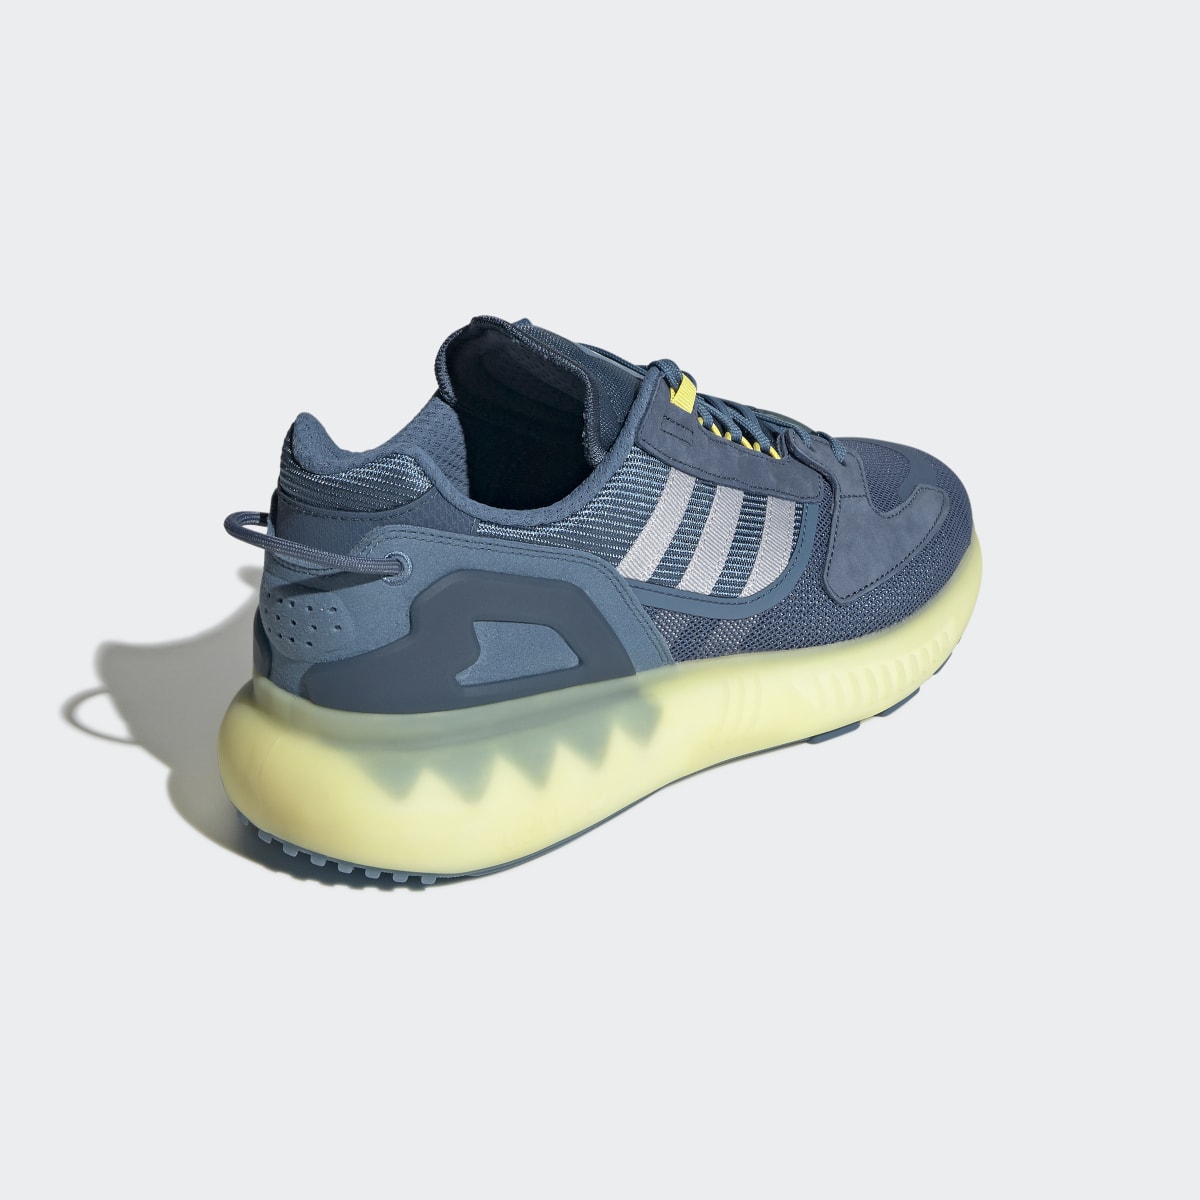 Adidas ZX 5K BOOST Shoes. 6